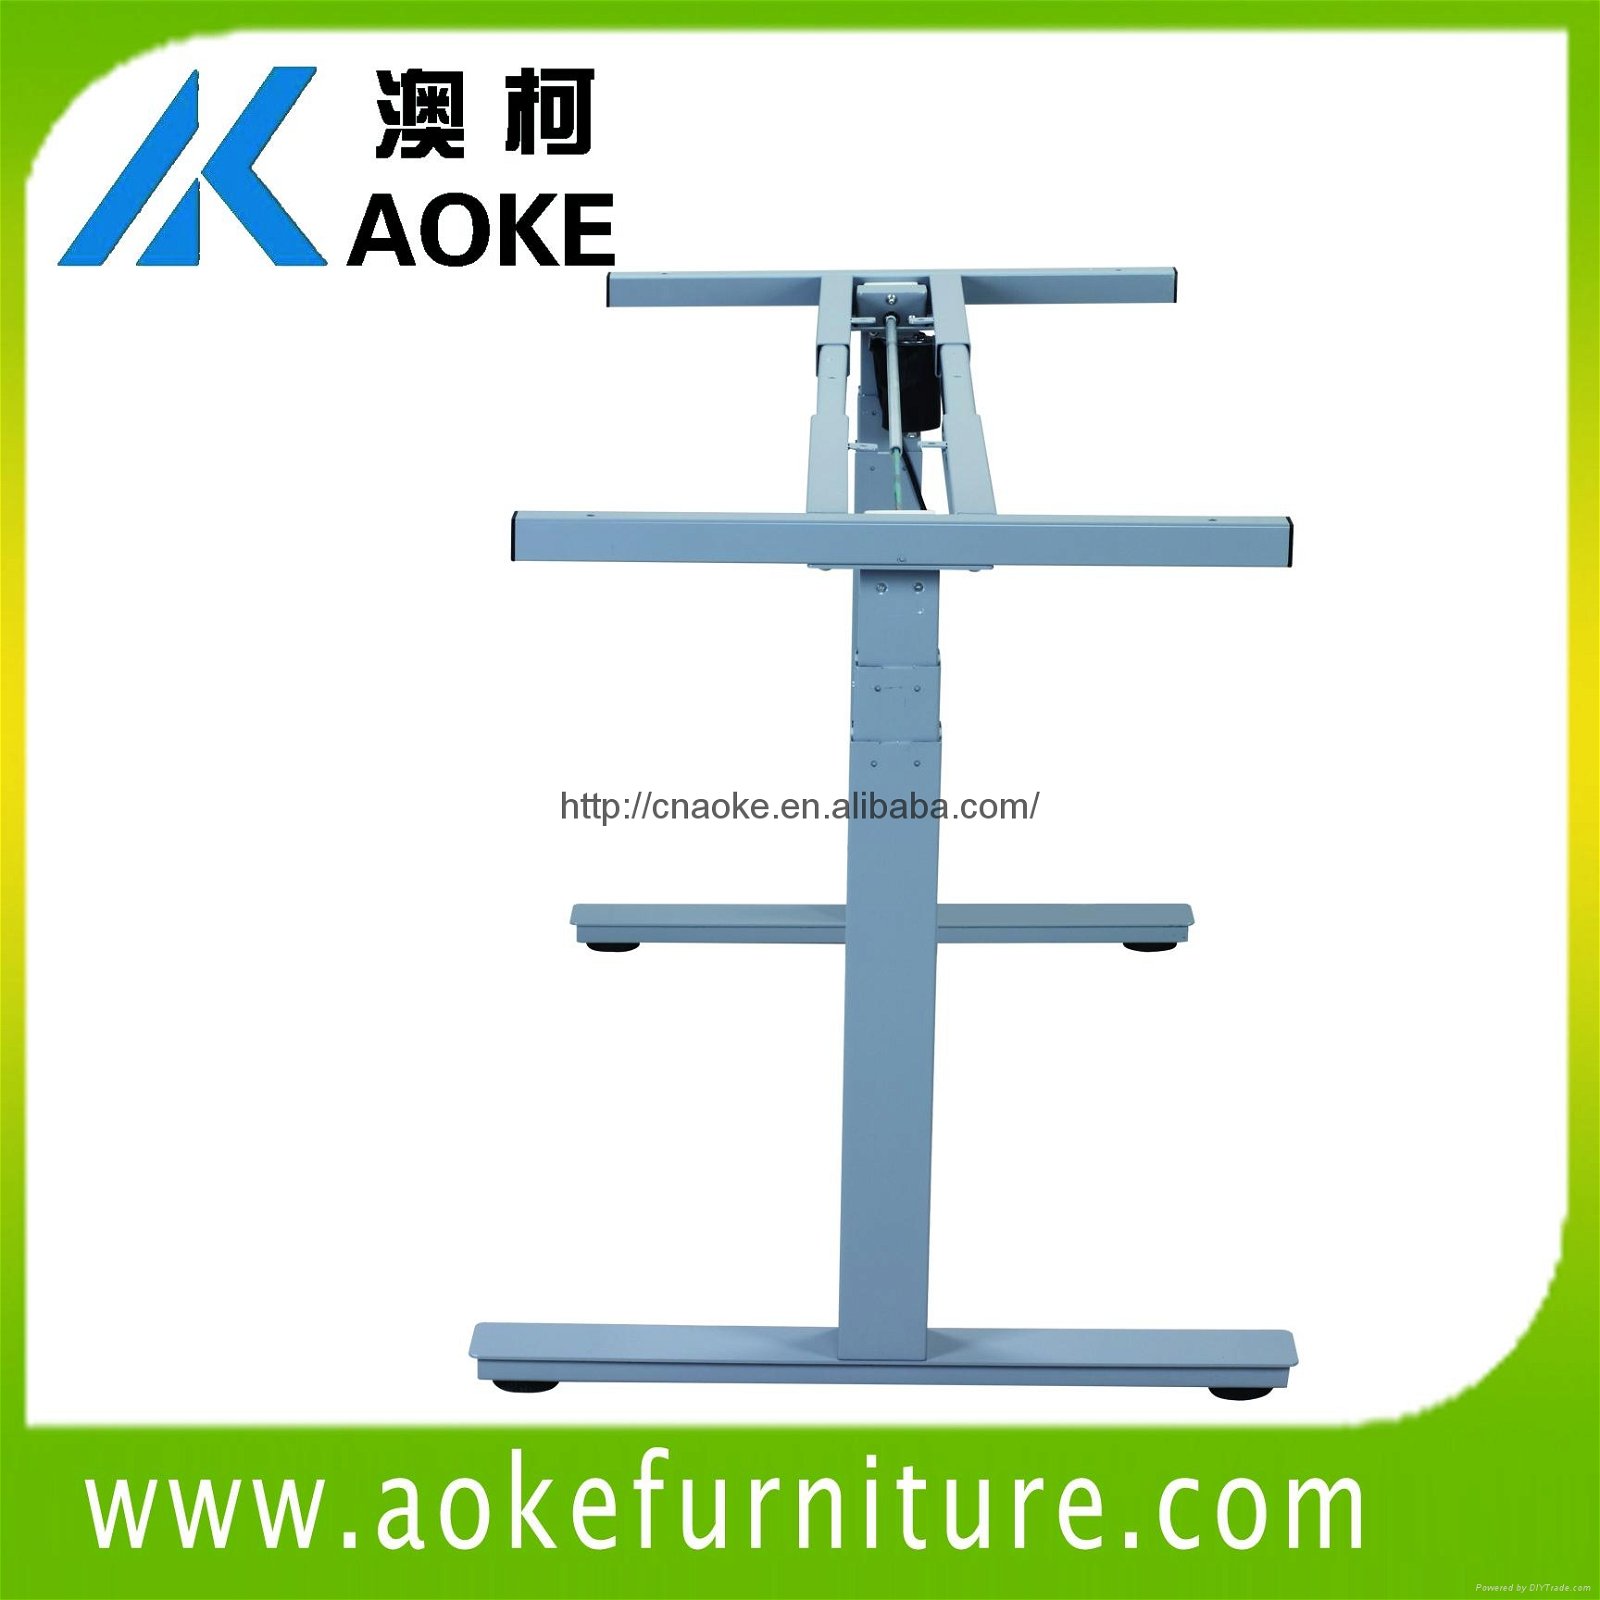 AOKE AK02ES-A-F motorized up and down standing table 3